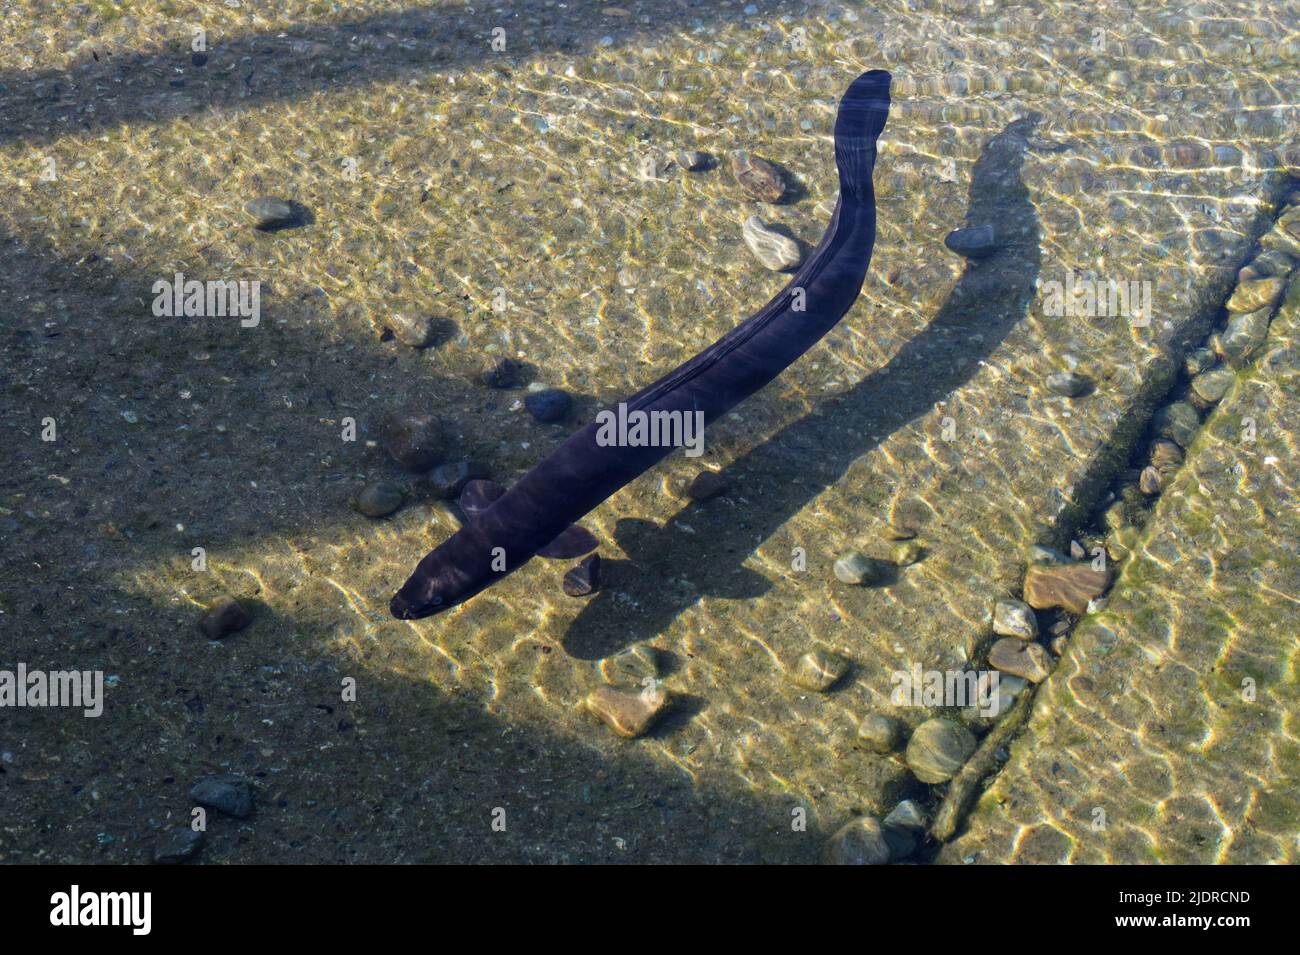 The long back fin of the native New Zealand longfin eel can be seen here. It is cruising over a boat ramp at Lake Rotoiti in Nelson Lakes National Par Stock Photo